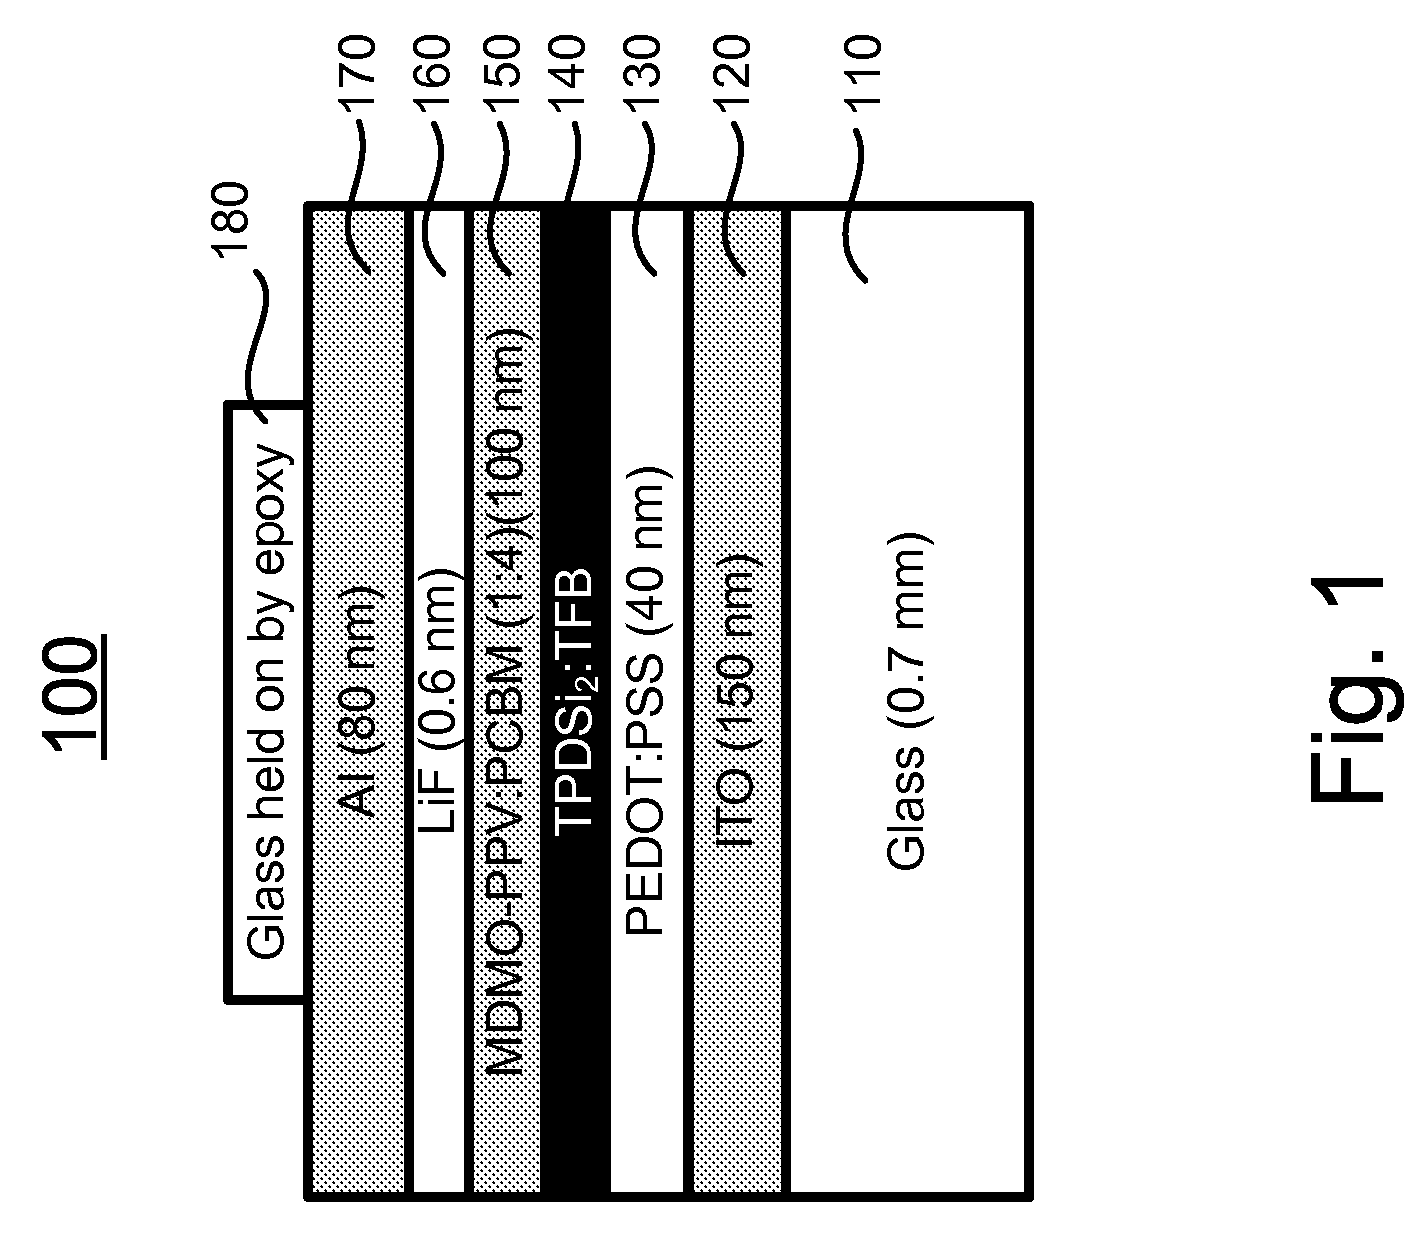 Electron-blocking layer / hole-transport layer for organic photovoltaics and applications of same